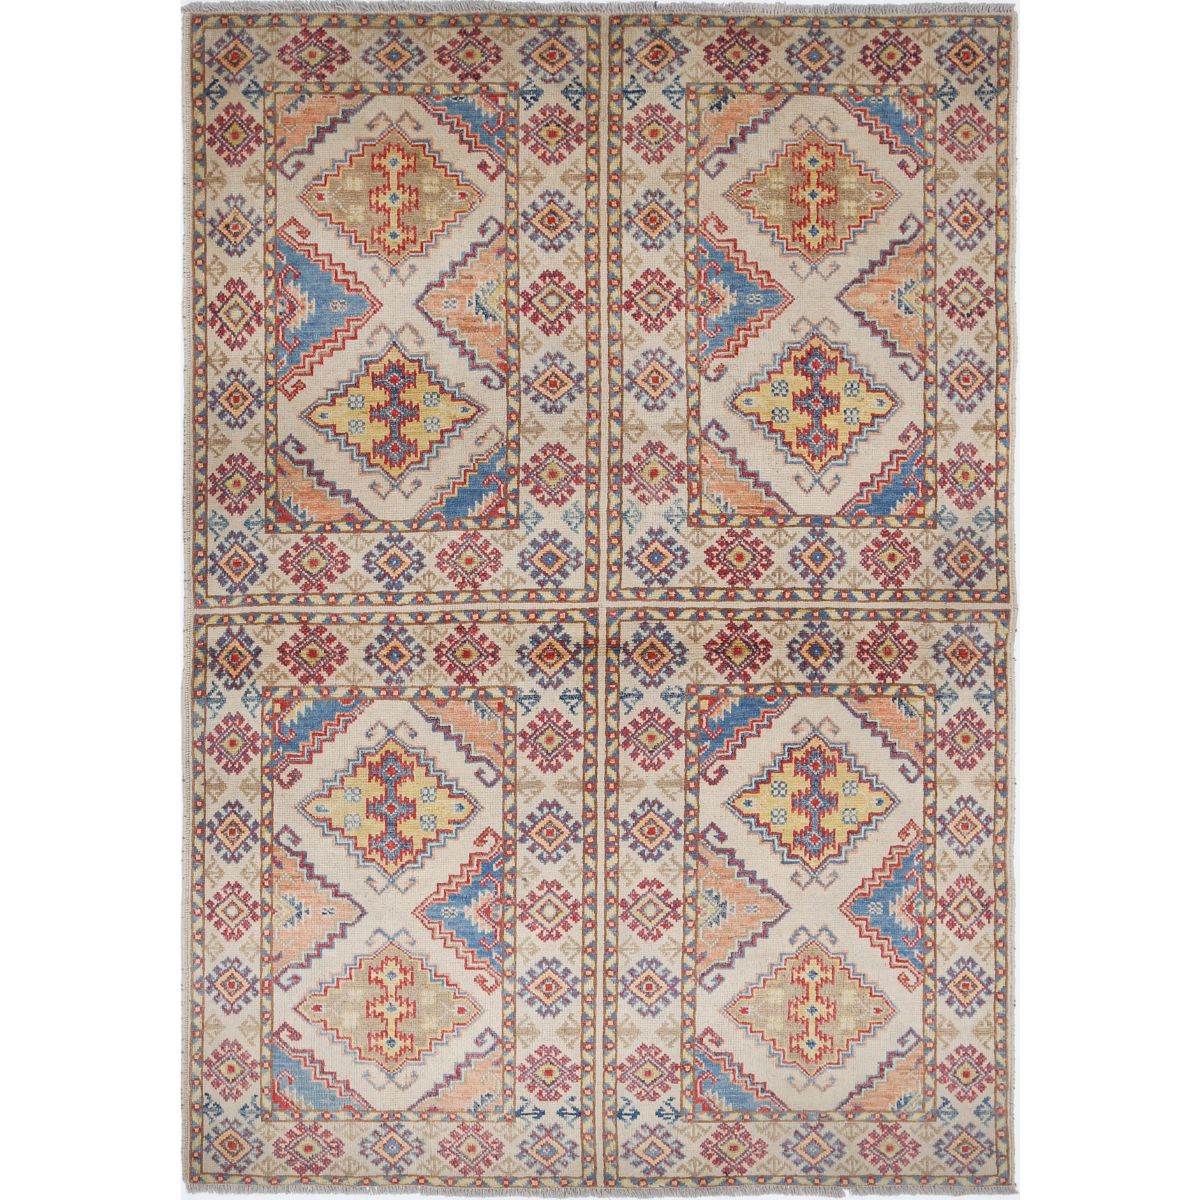 Revival 3' 11" X 5' 9" Wool Hand Knotted Rug